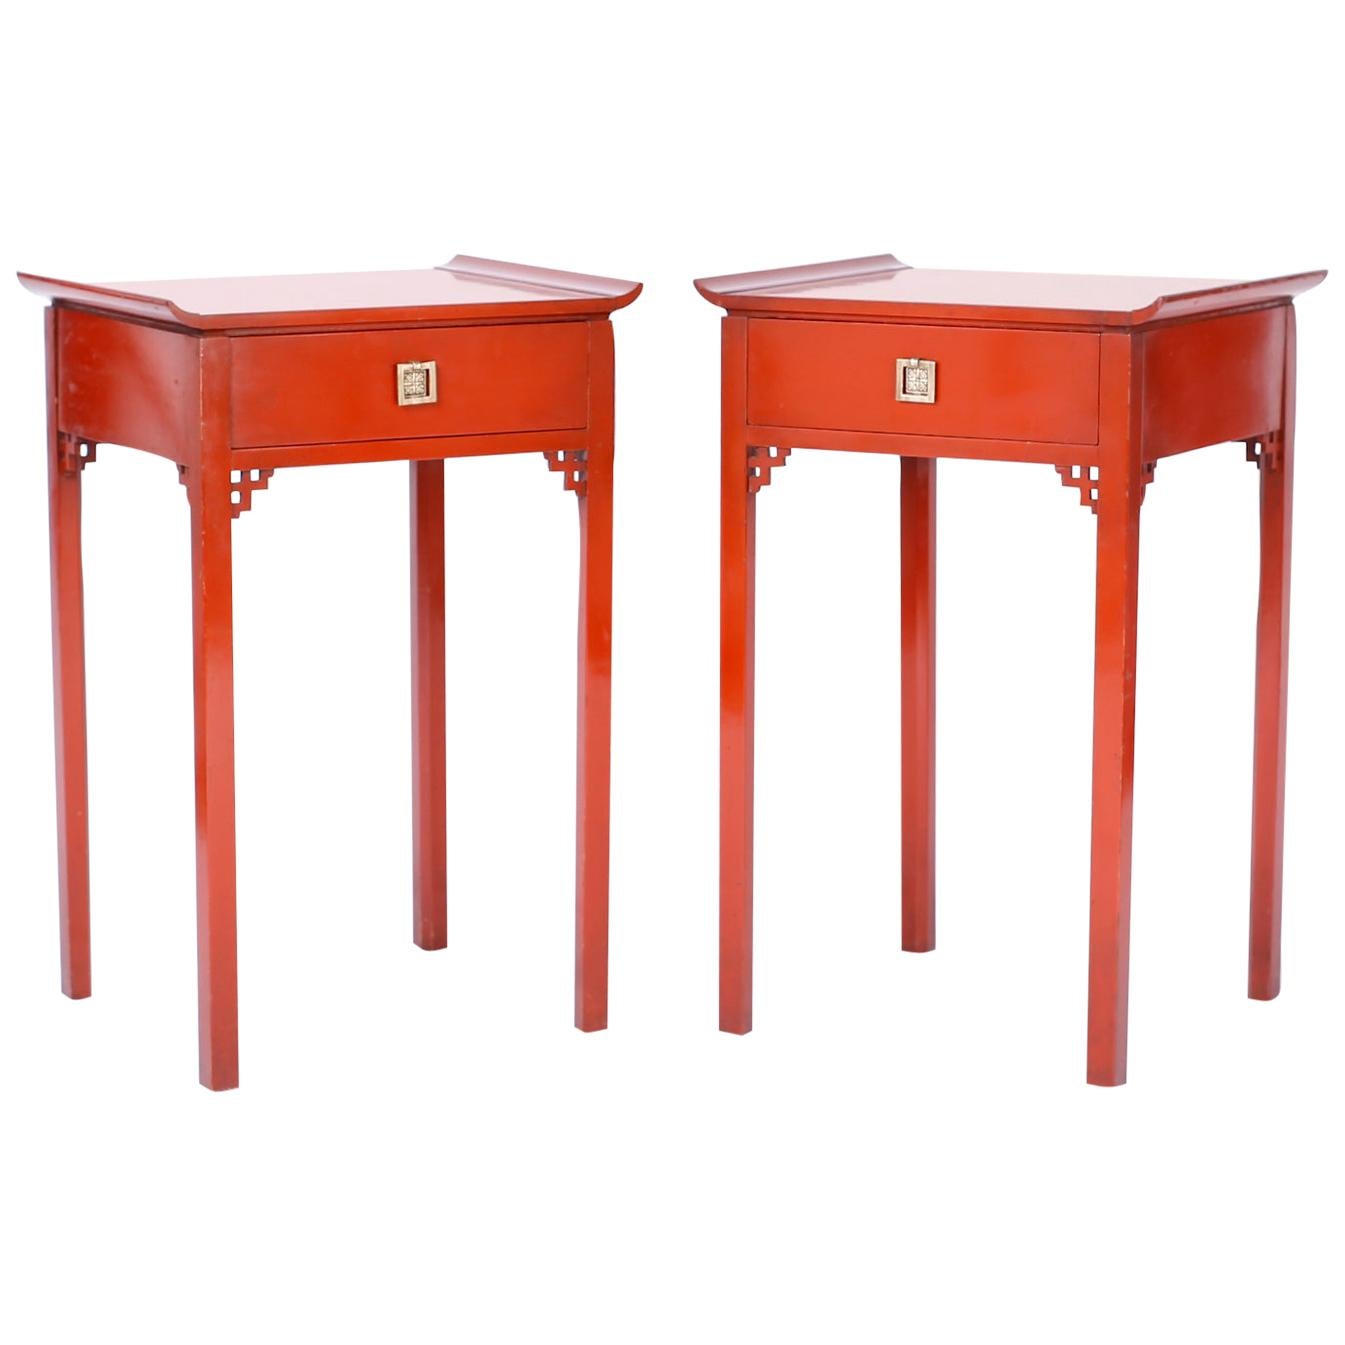 Pair of Red Pagoda Stands or End Tables